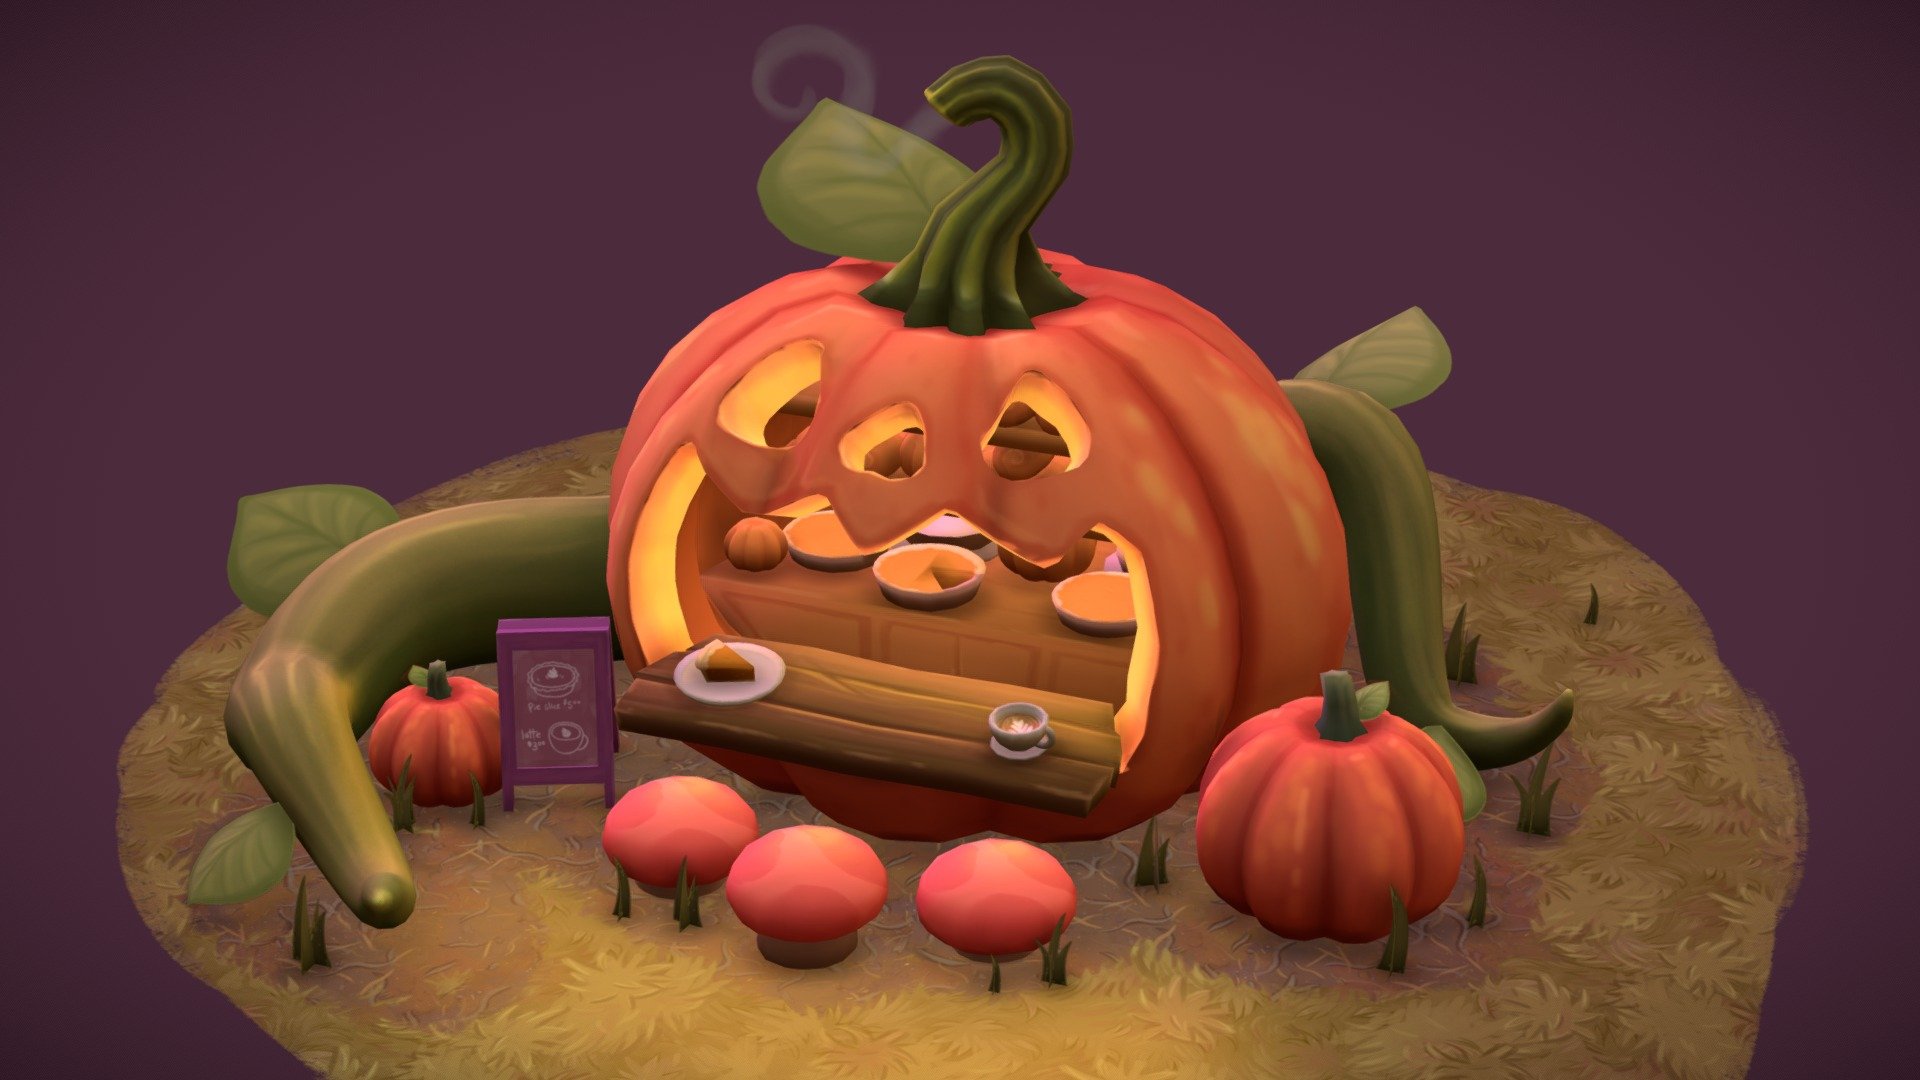 A pumpkin cafe I created for fall, based off an old 2D piece I created a few years ago. 

Big thank you to Ashleigh Warner for all her invaluable advice and feedback! - Pumpkin Cafe - 3D model by Gabby DaRienzo (@gabbydarienzo) 3d model